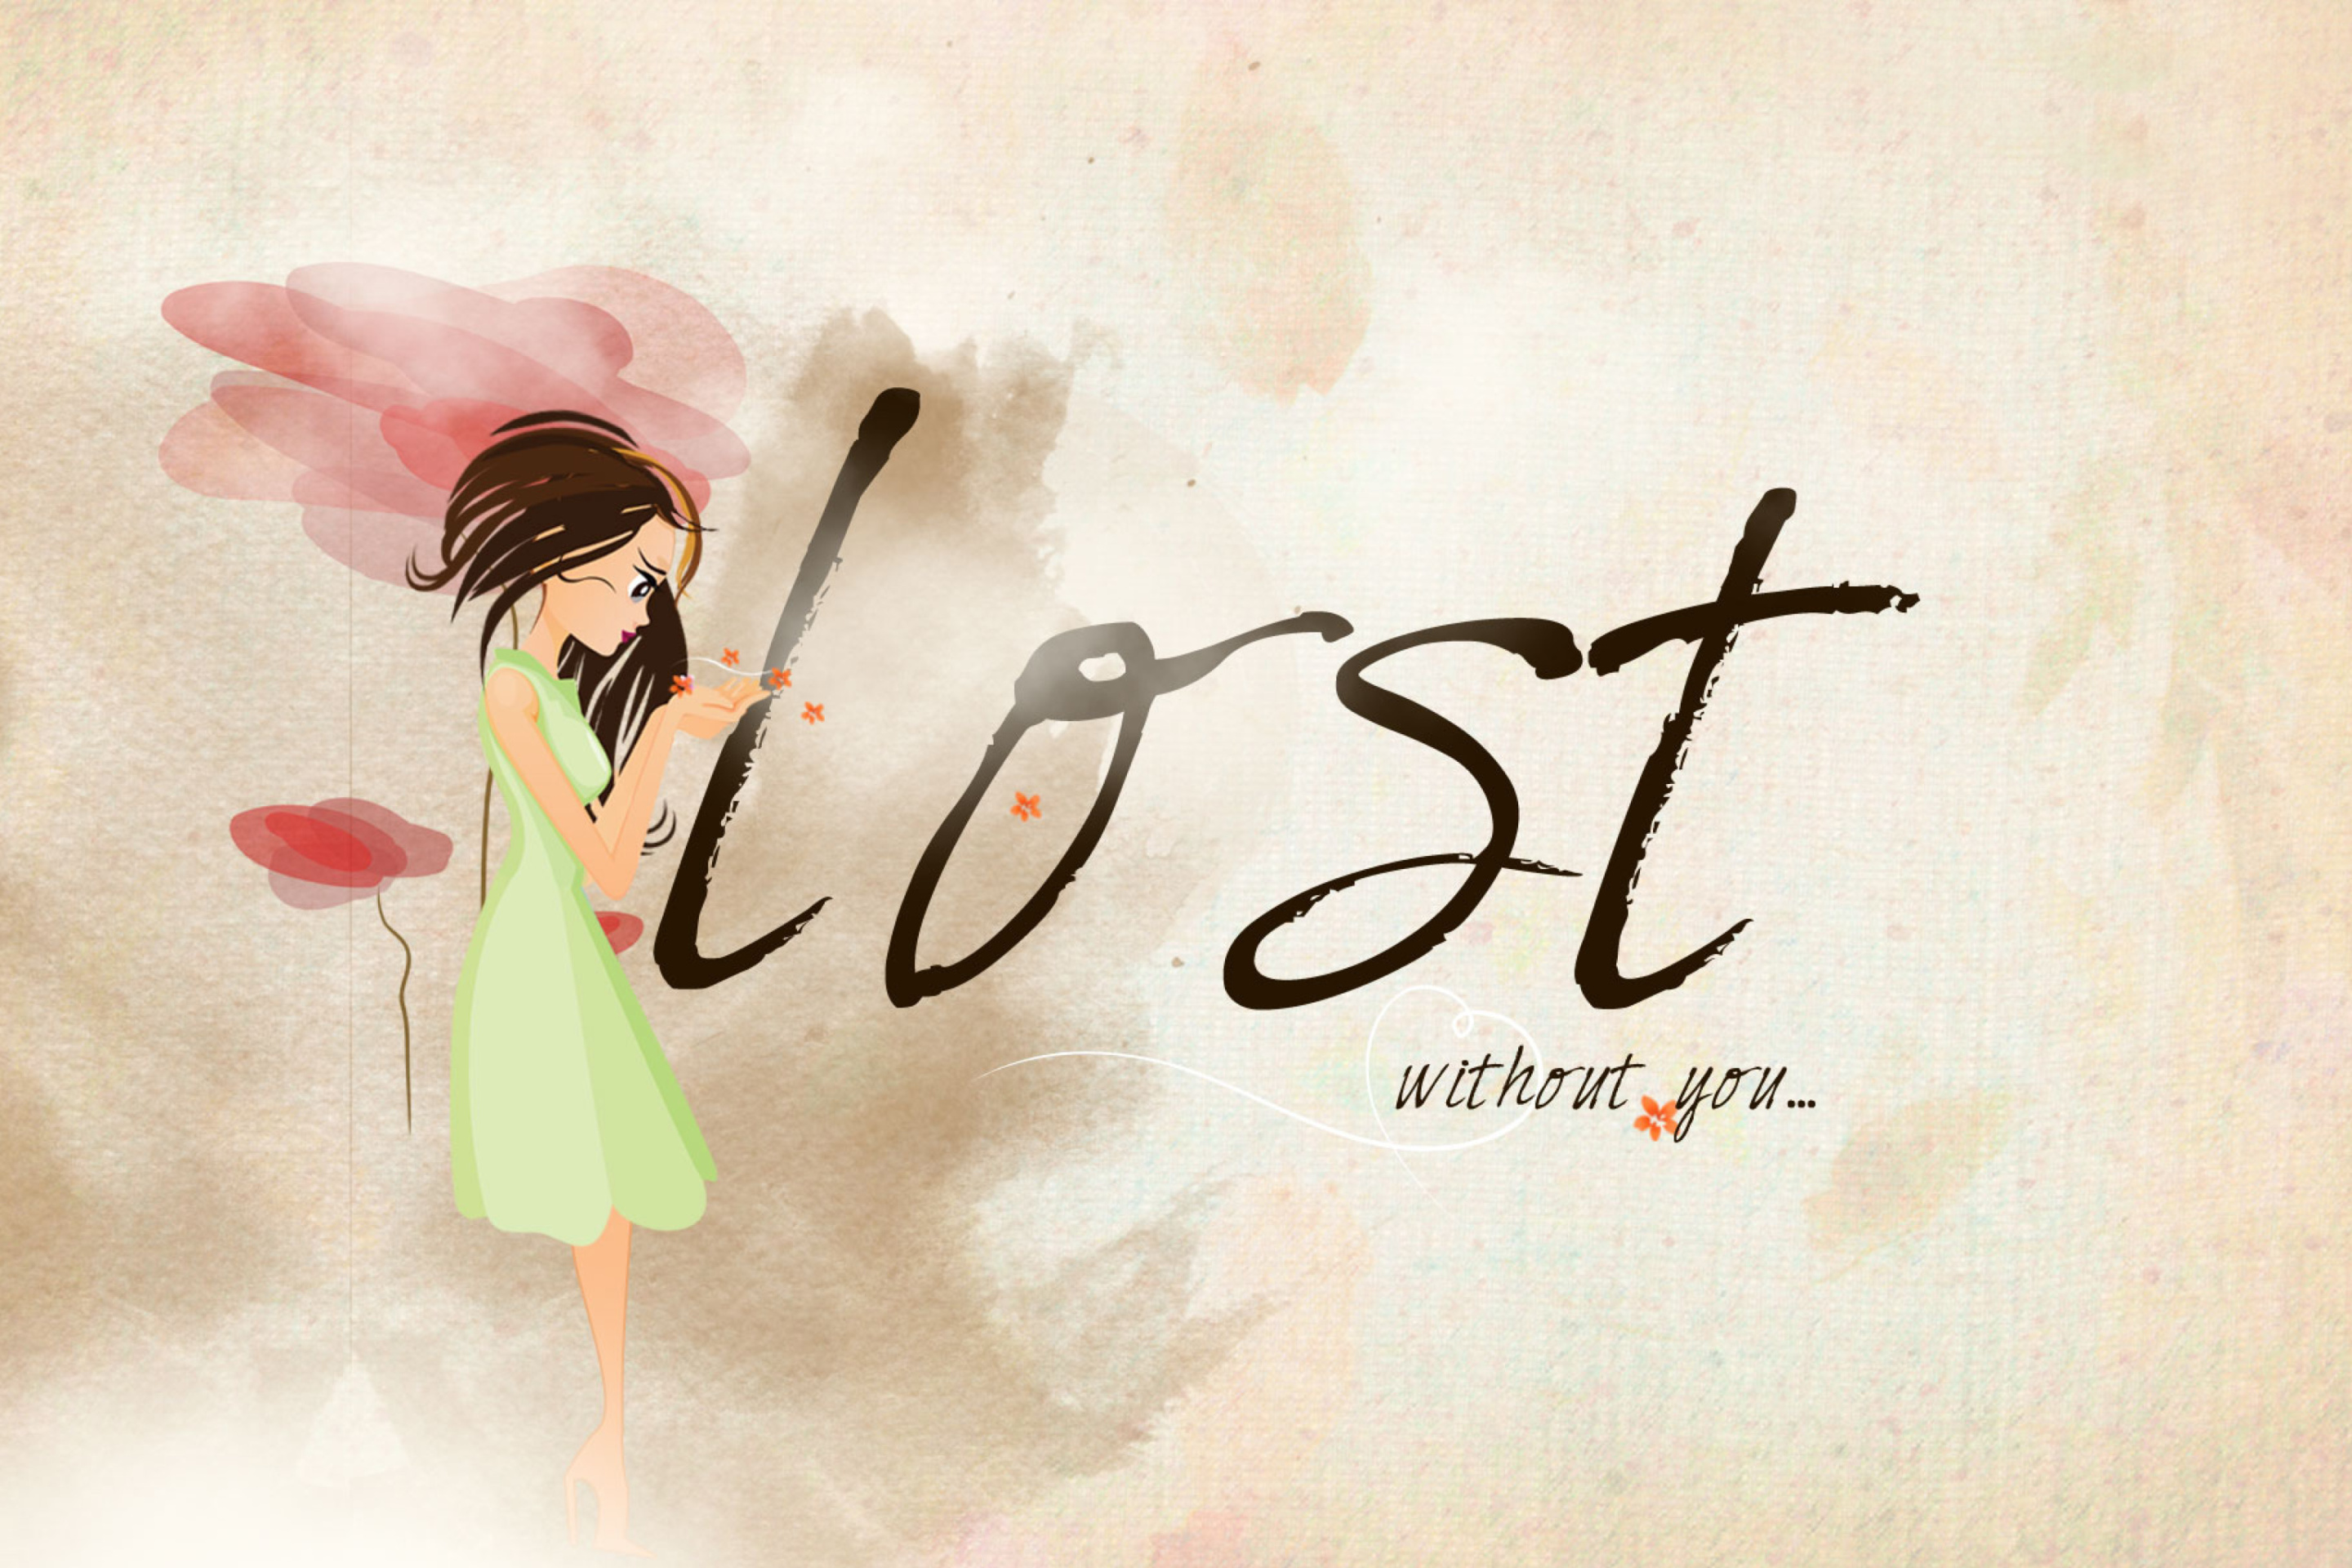 Das Lost Without You Wallpaper 2880x1920